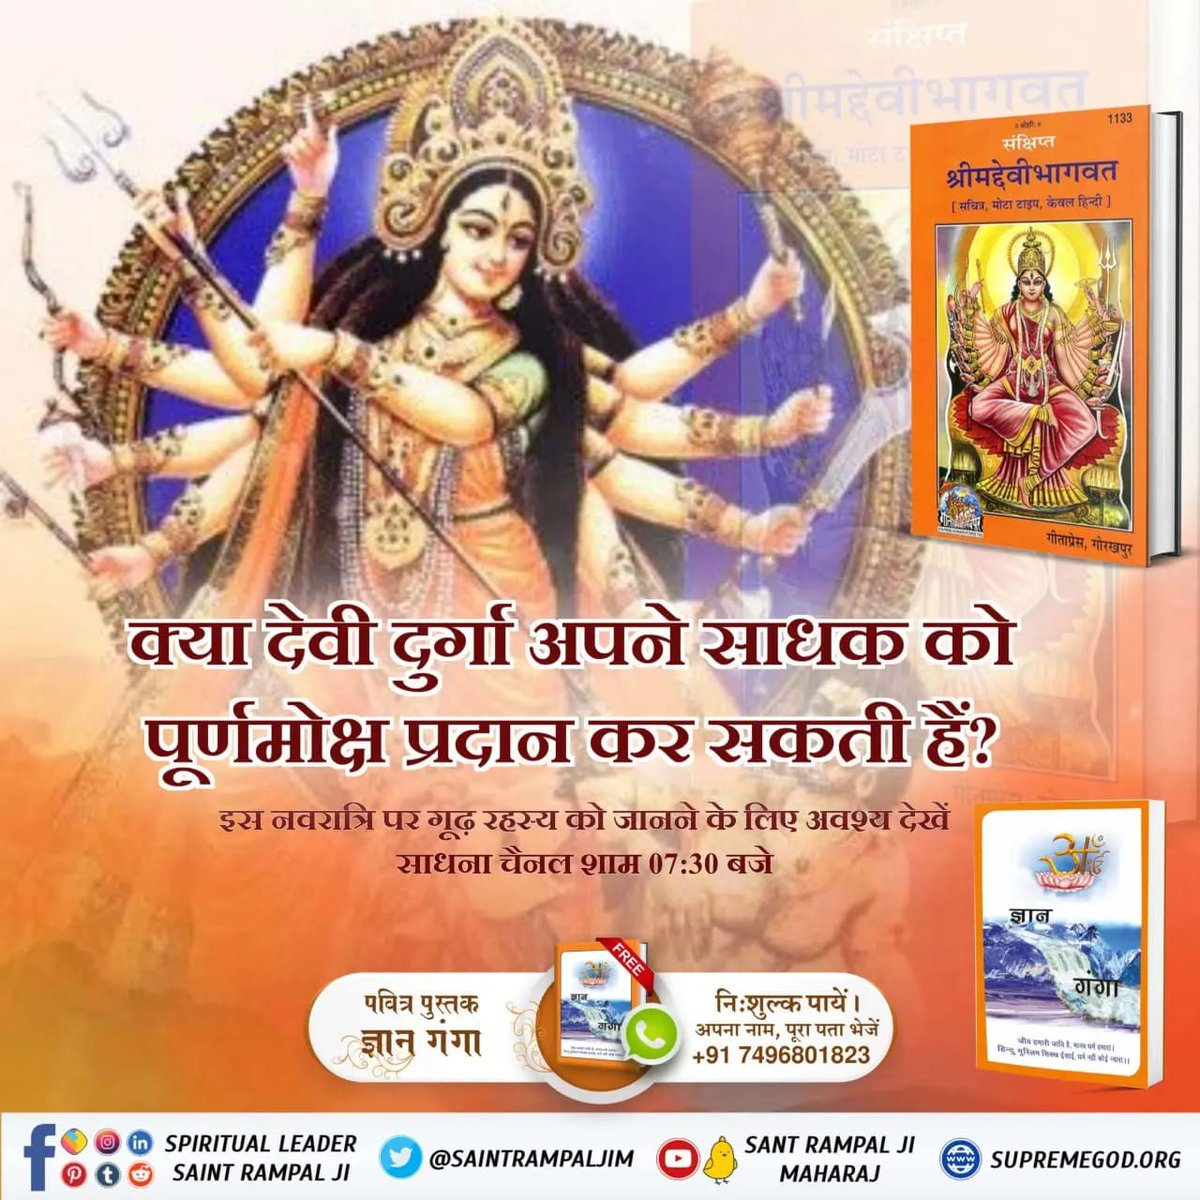 #भूखेबच्चेदेख_मां_कैसे_खुश_हो People who are unaware about the ultimate Spiritual Knowledge worship Goddess Durga. But our Holy Scriptures like Vedas and Shrimad Bhagwat Gita suggest worshiping Almighty God Kabir Saheb.